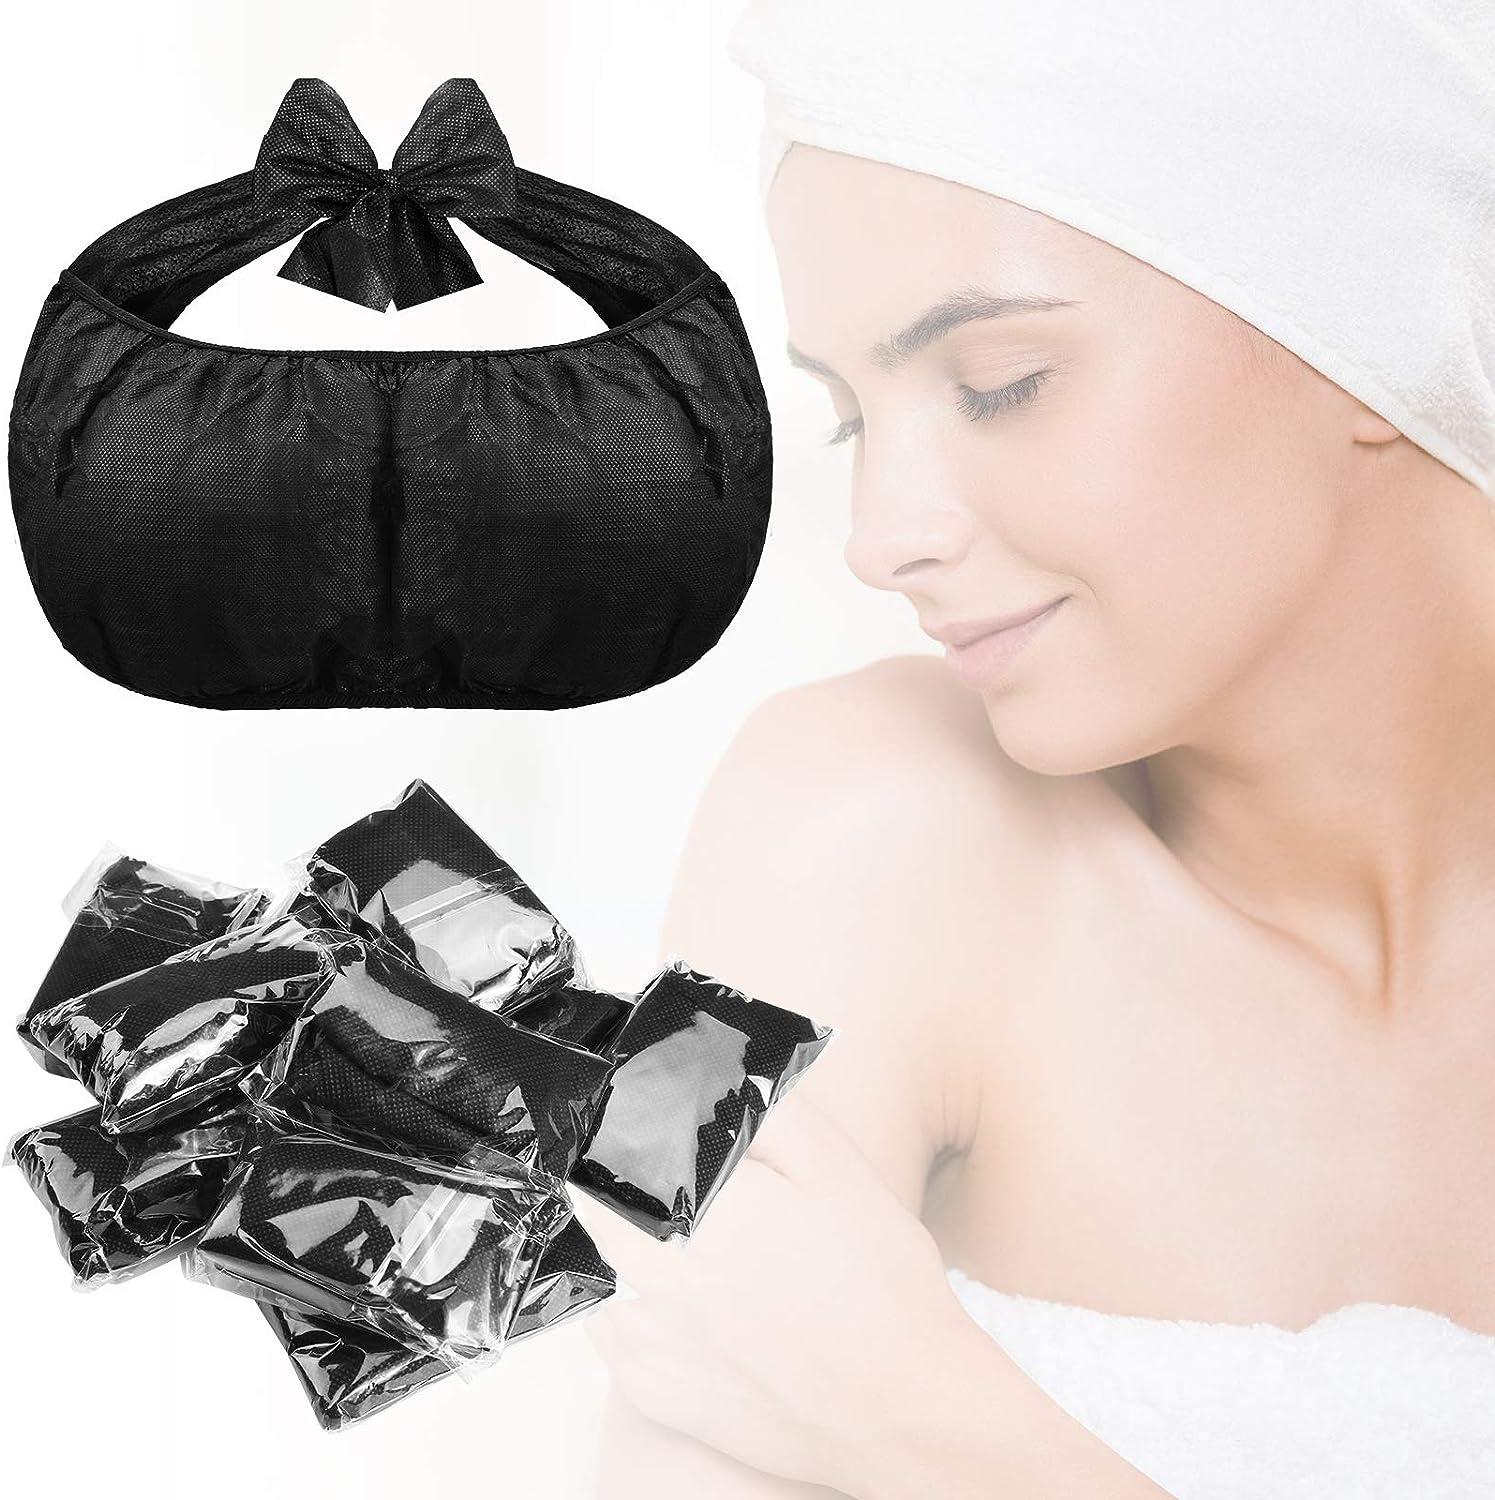 50 Pcs Women's Disposable Bras Elastic Loop Top for Spa Spray Tanning and  Waxing